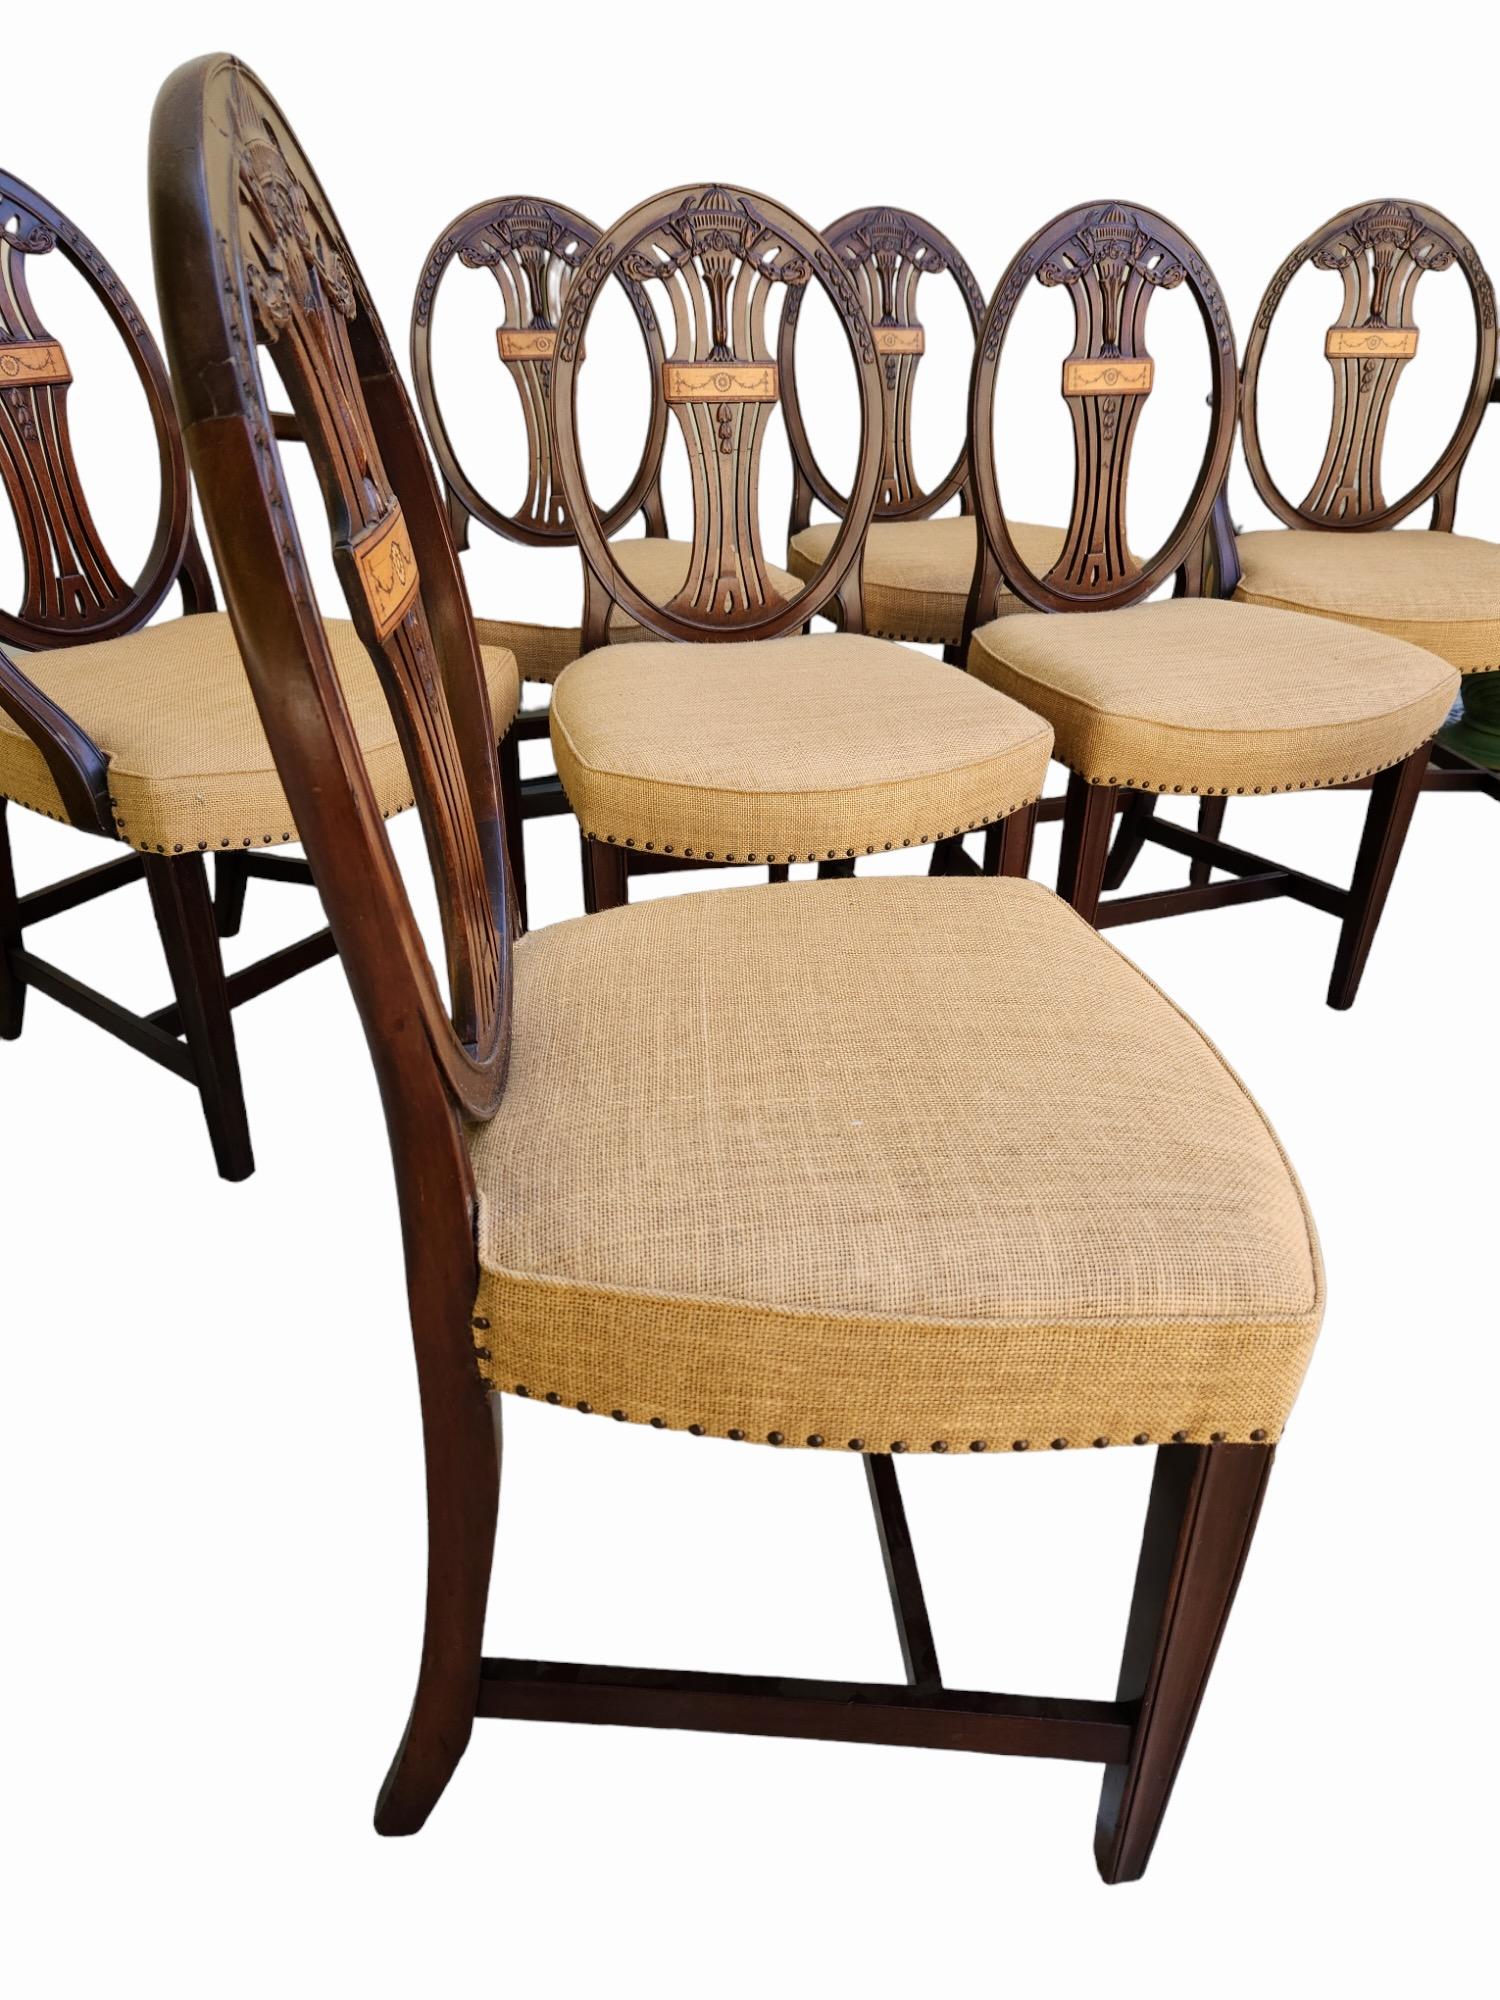 Upholstery 1900s English Carved & Inlaid Dining Chairs, Group of 8 For Sale